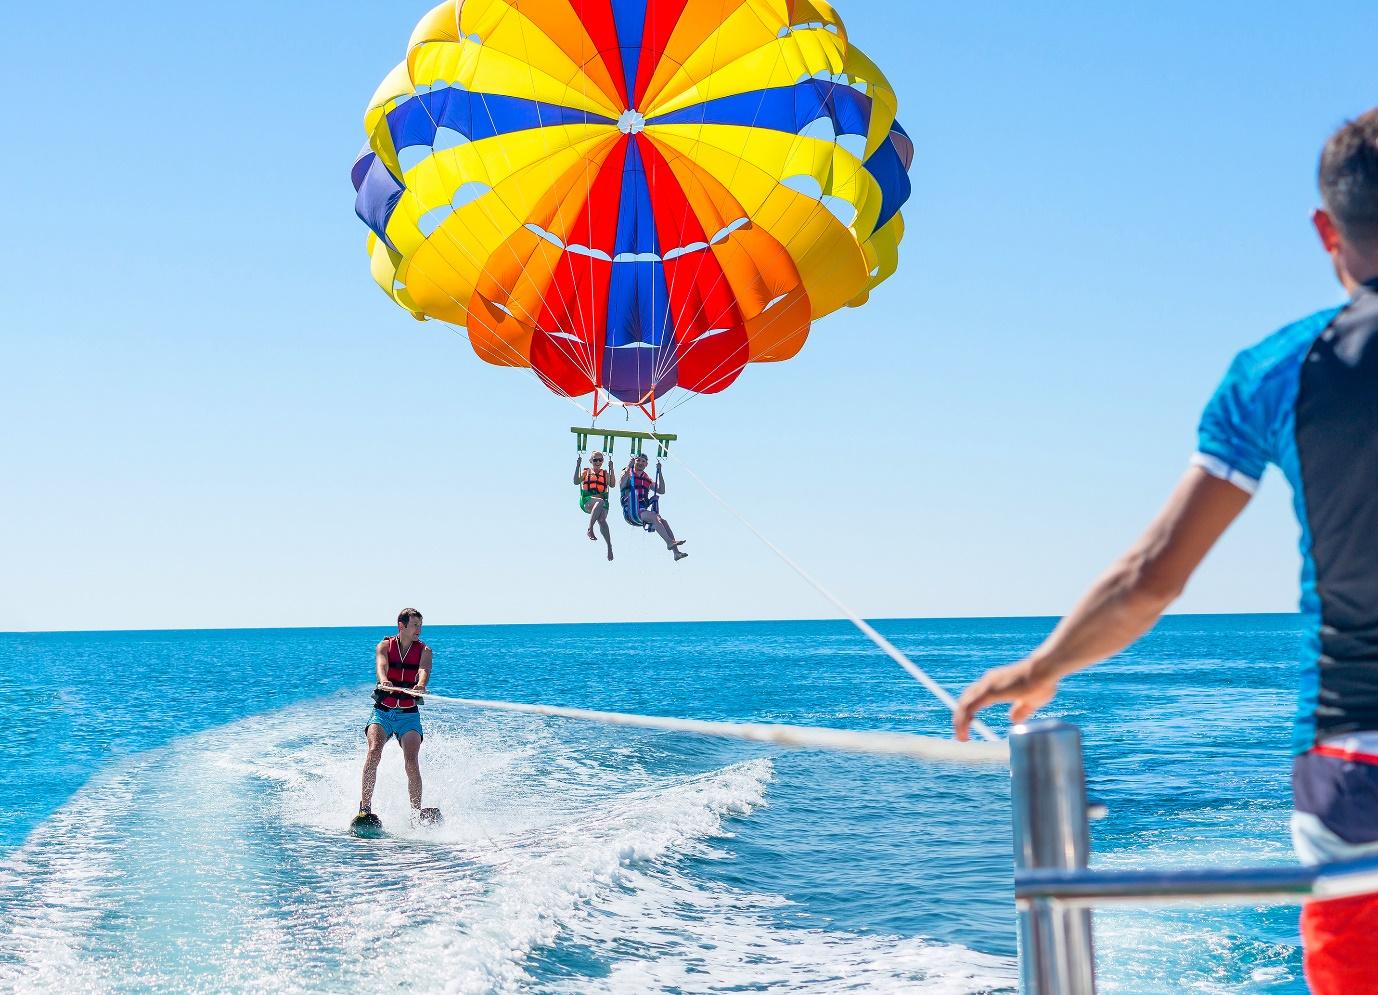 People parasailing on a boat

Description automatically generated